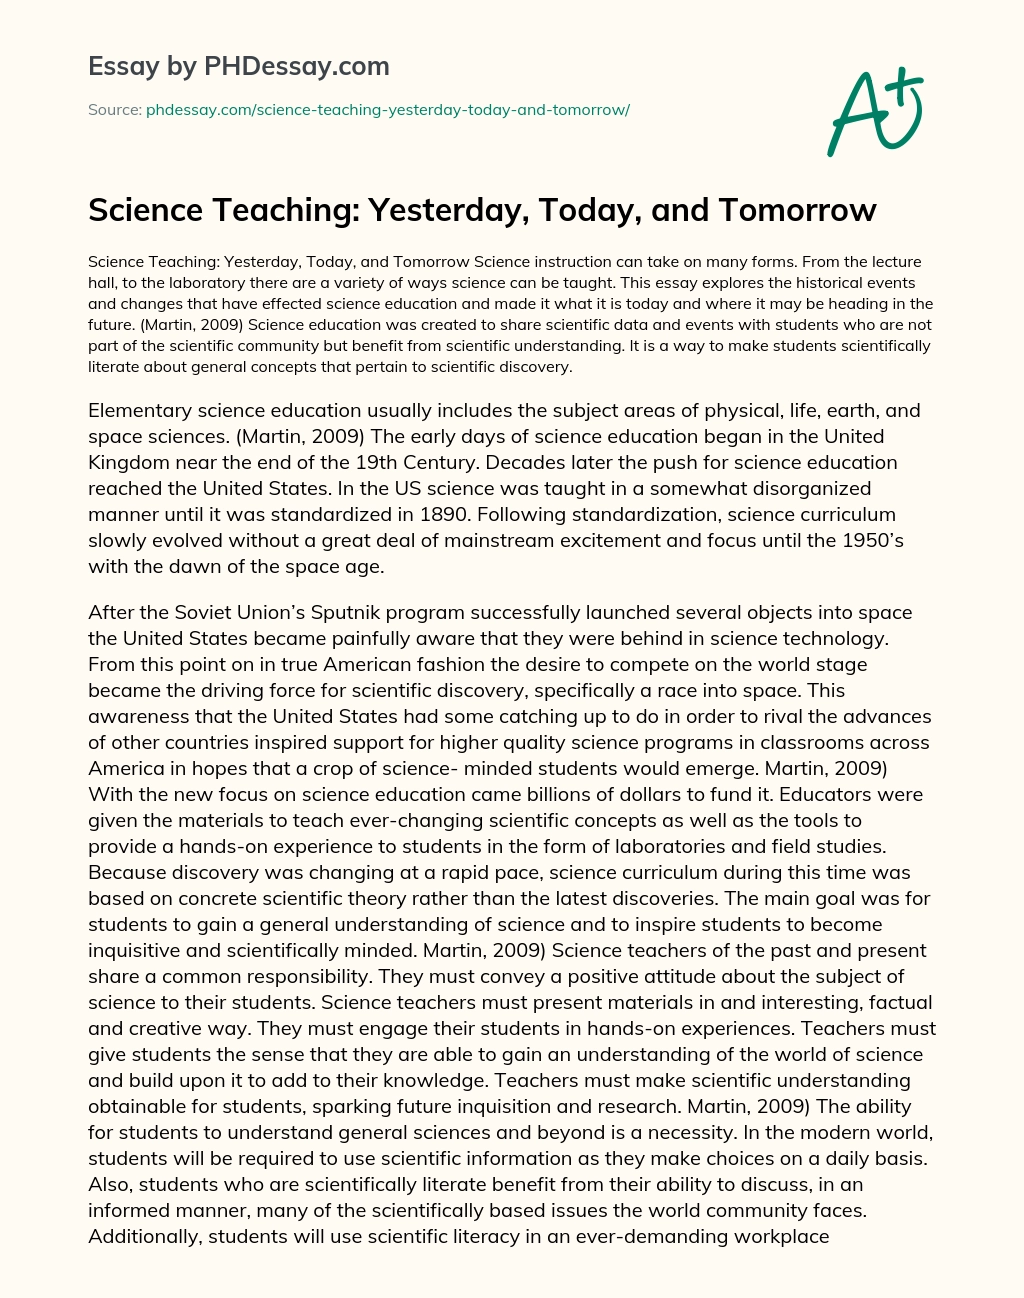 Science Teaching: Yesterday, Today, and Tomorrow essay